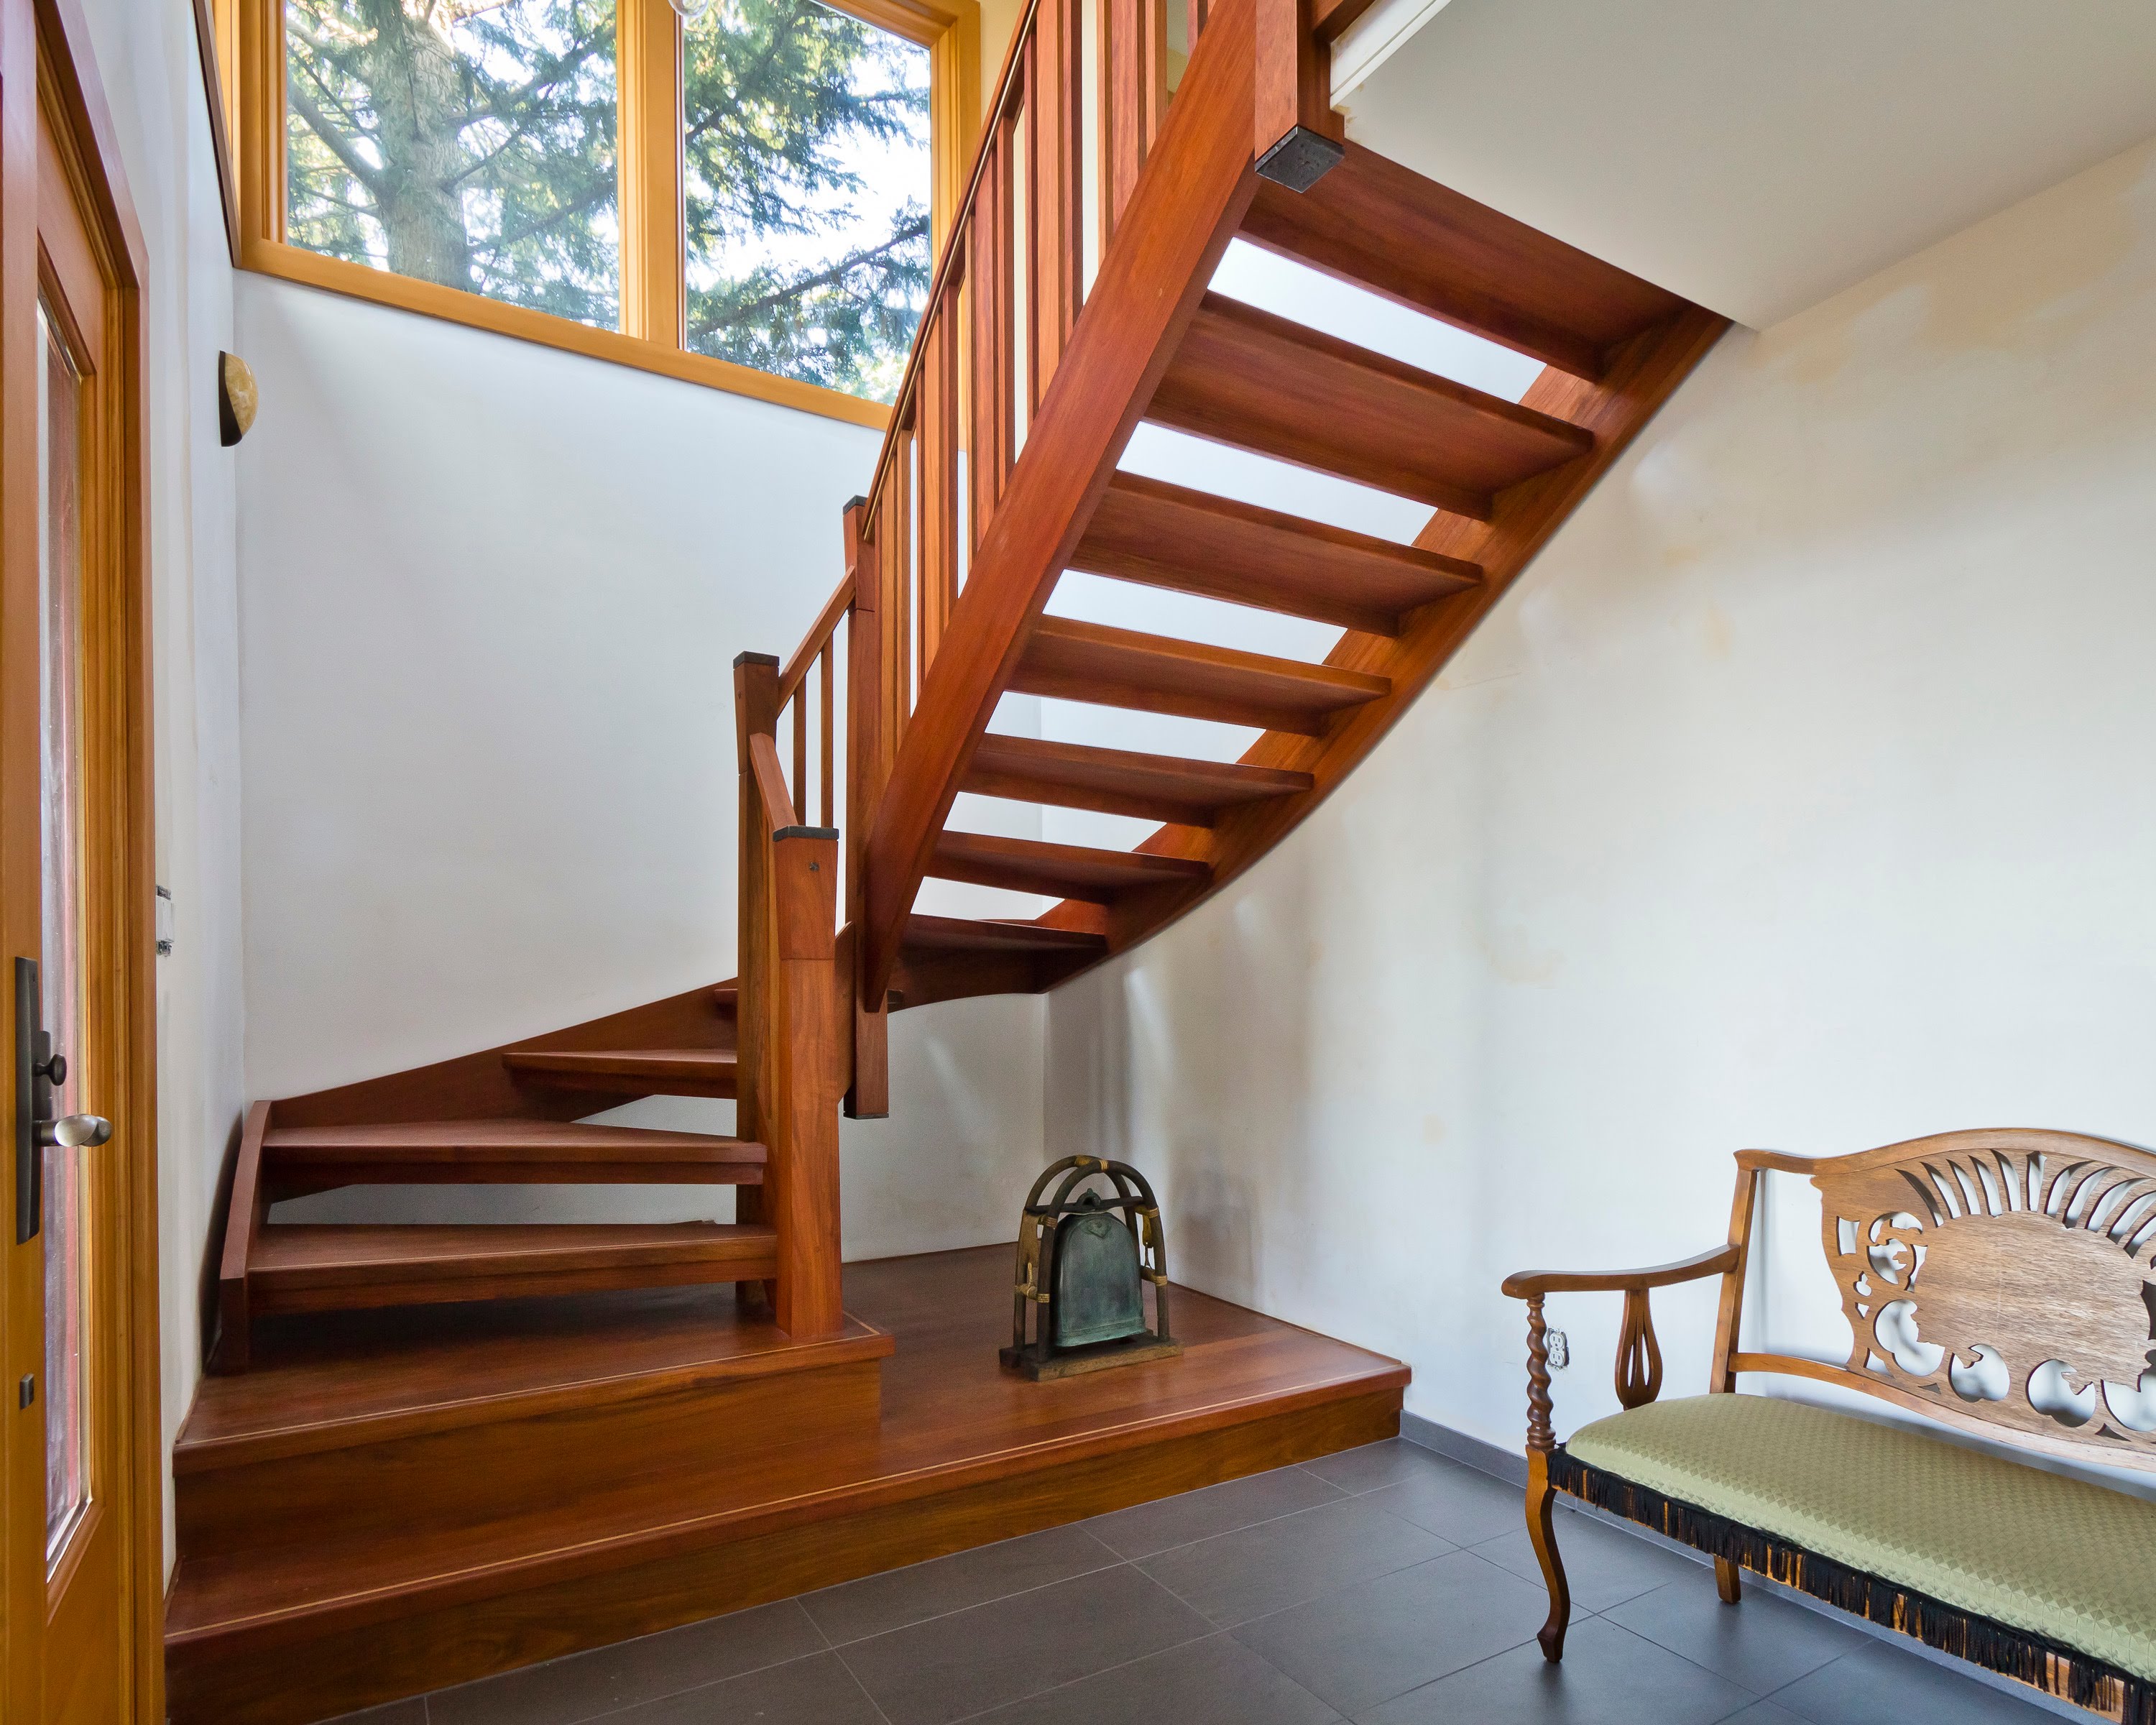 Awesome Wooden Staircase - YouTube